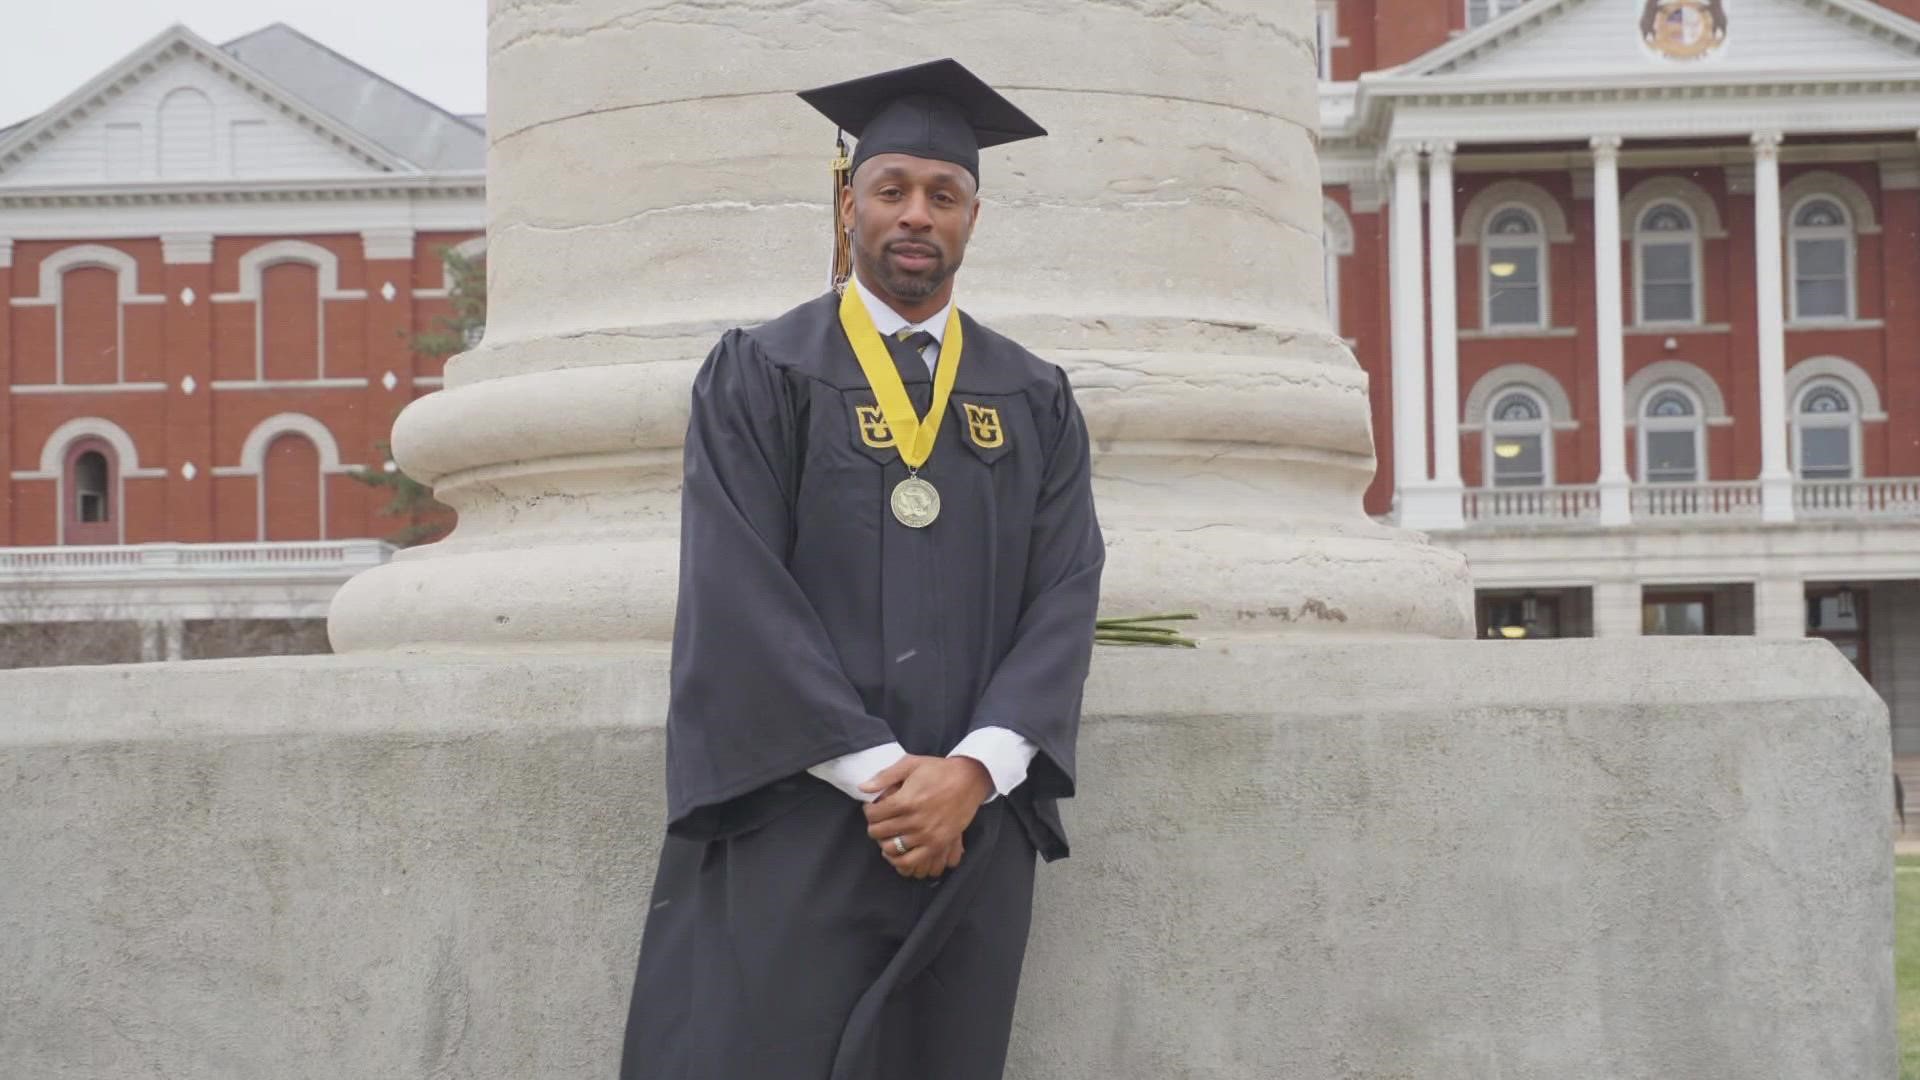 Justin Gage is one of the most talented athletes in Missouri history. But it's a promise of education that brought him back to Mizzou.